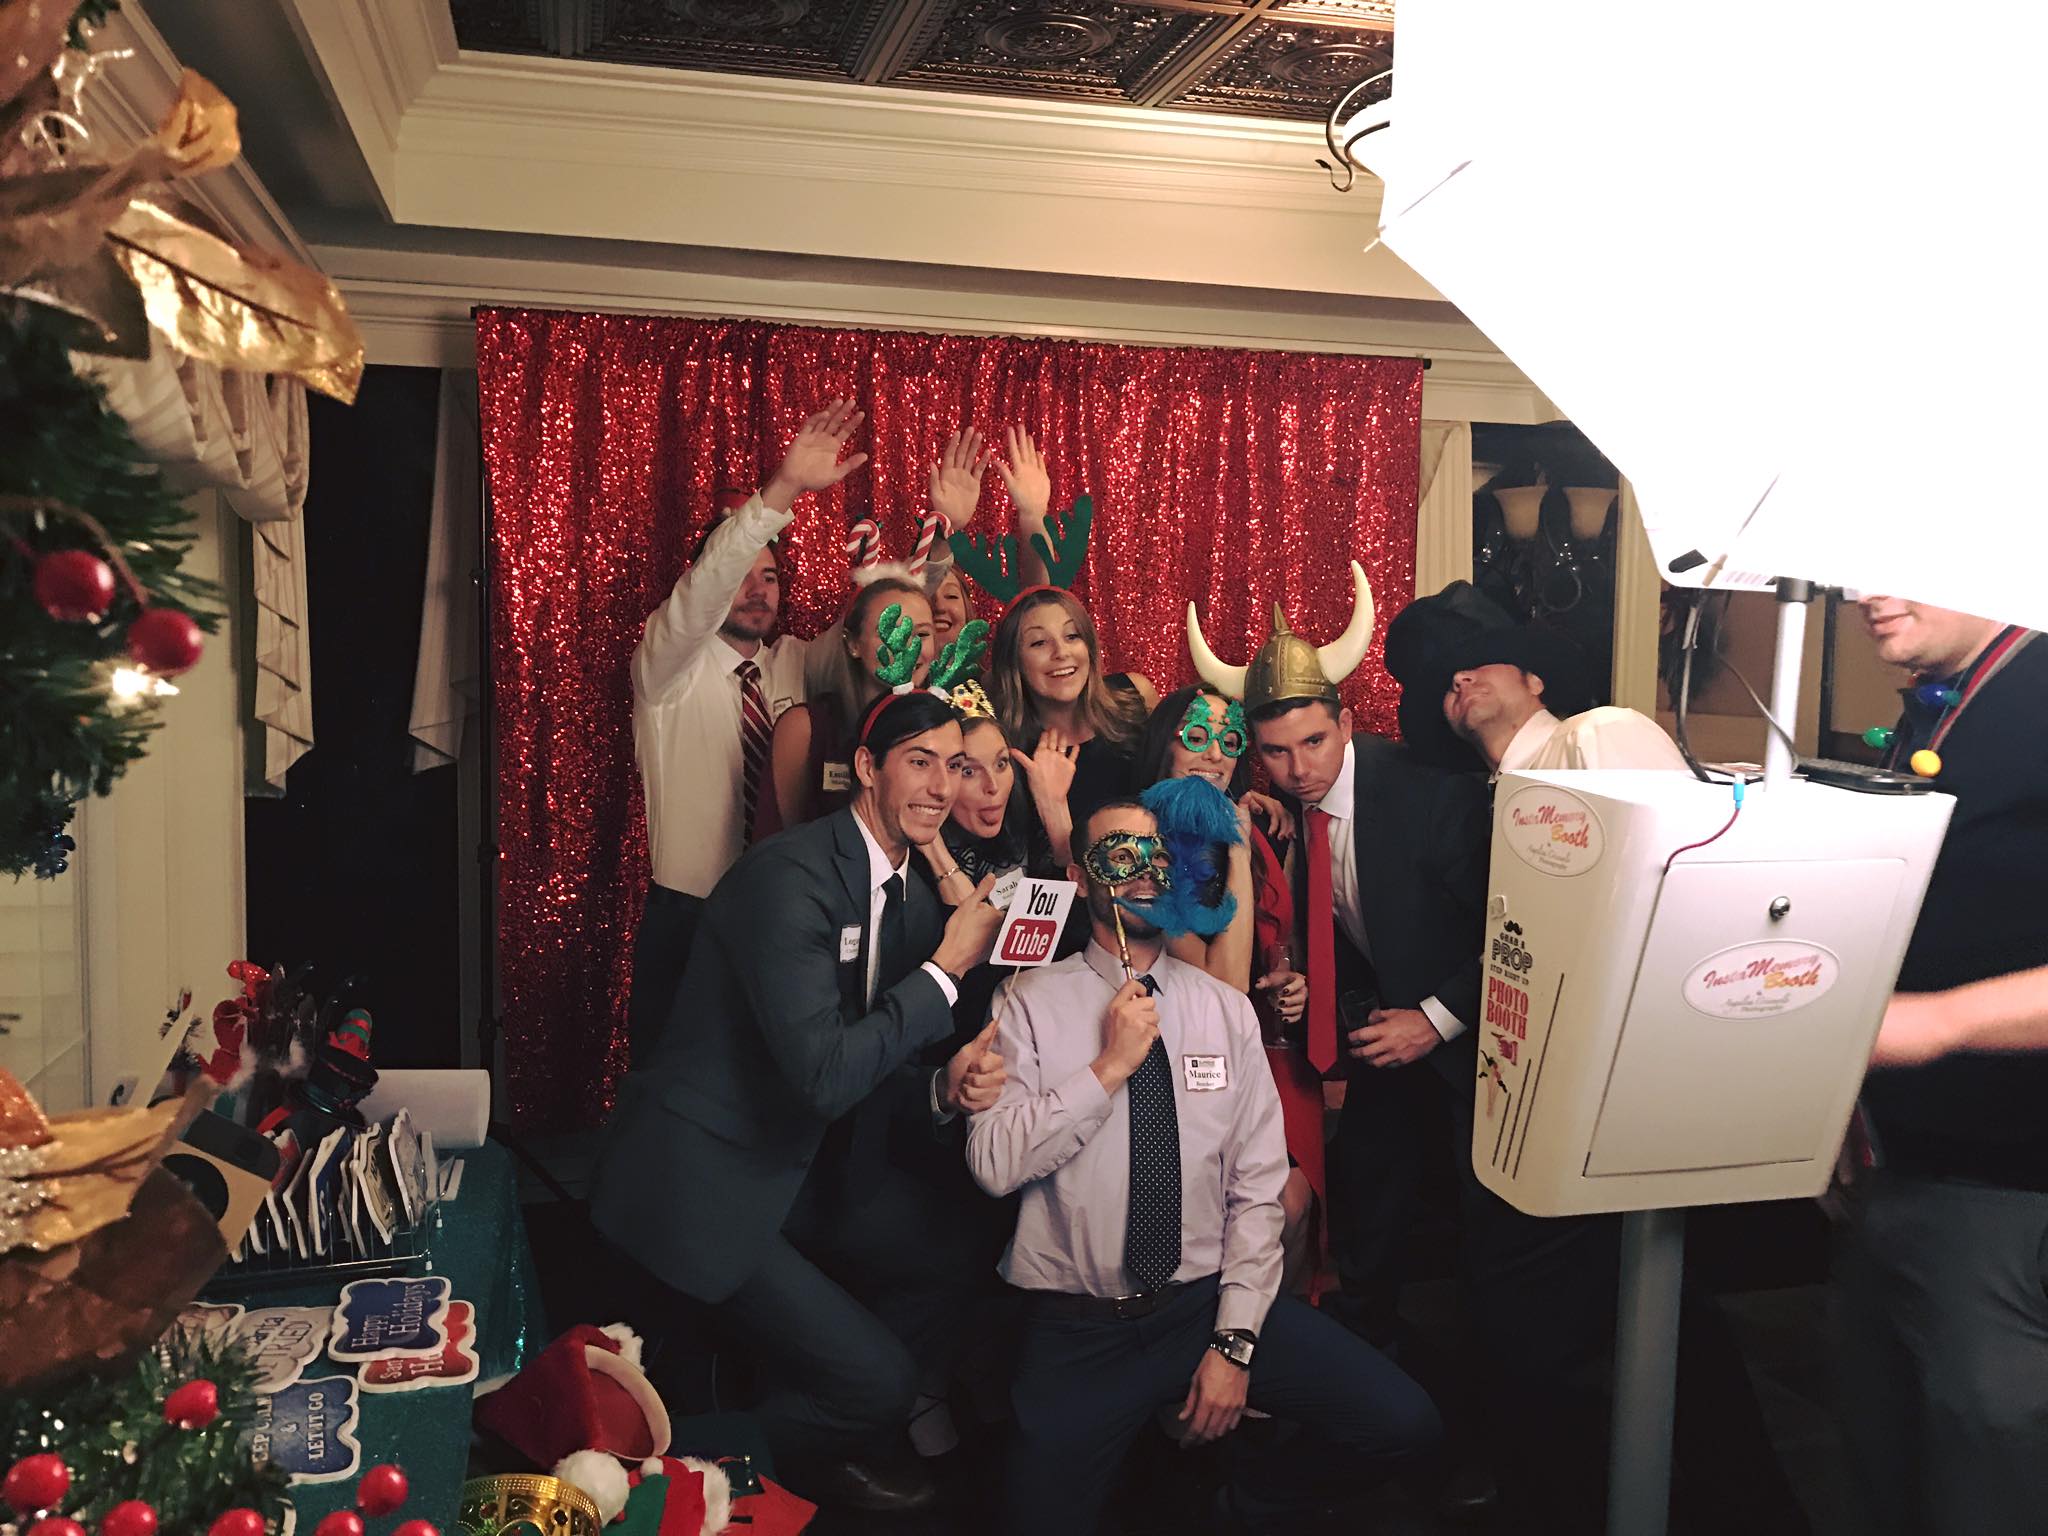 The Regis Hotel NYC Photo Booth - InstaMemoryBooth by Angelica Criscuolo Photography 